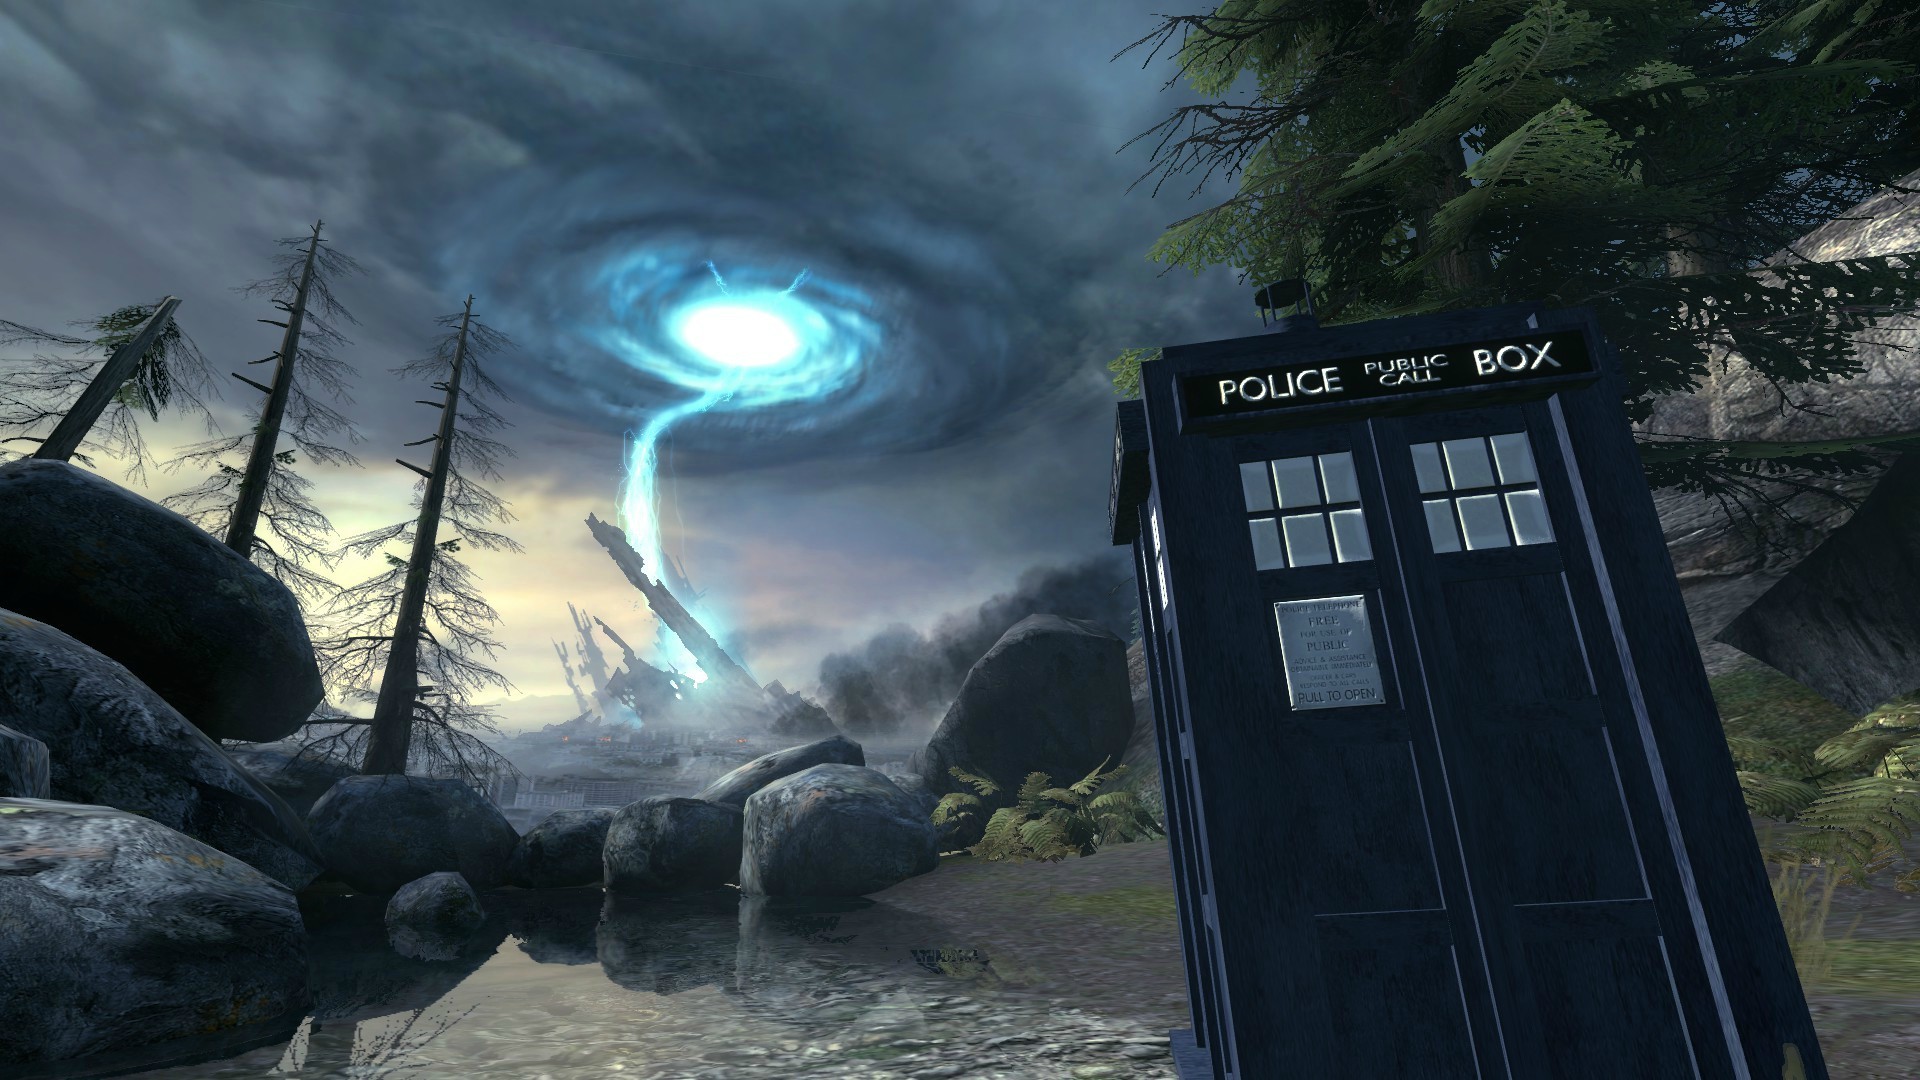 1920x1080 Had insomnia last night and decided to make this wallpaper using Garry's mod!  (a Half life 2 Sandbox mod) Does r/doctorwho approve?